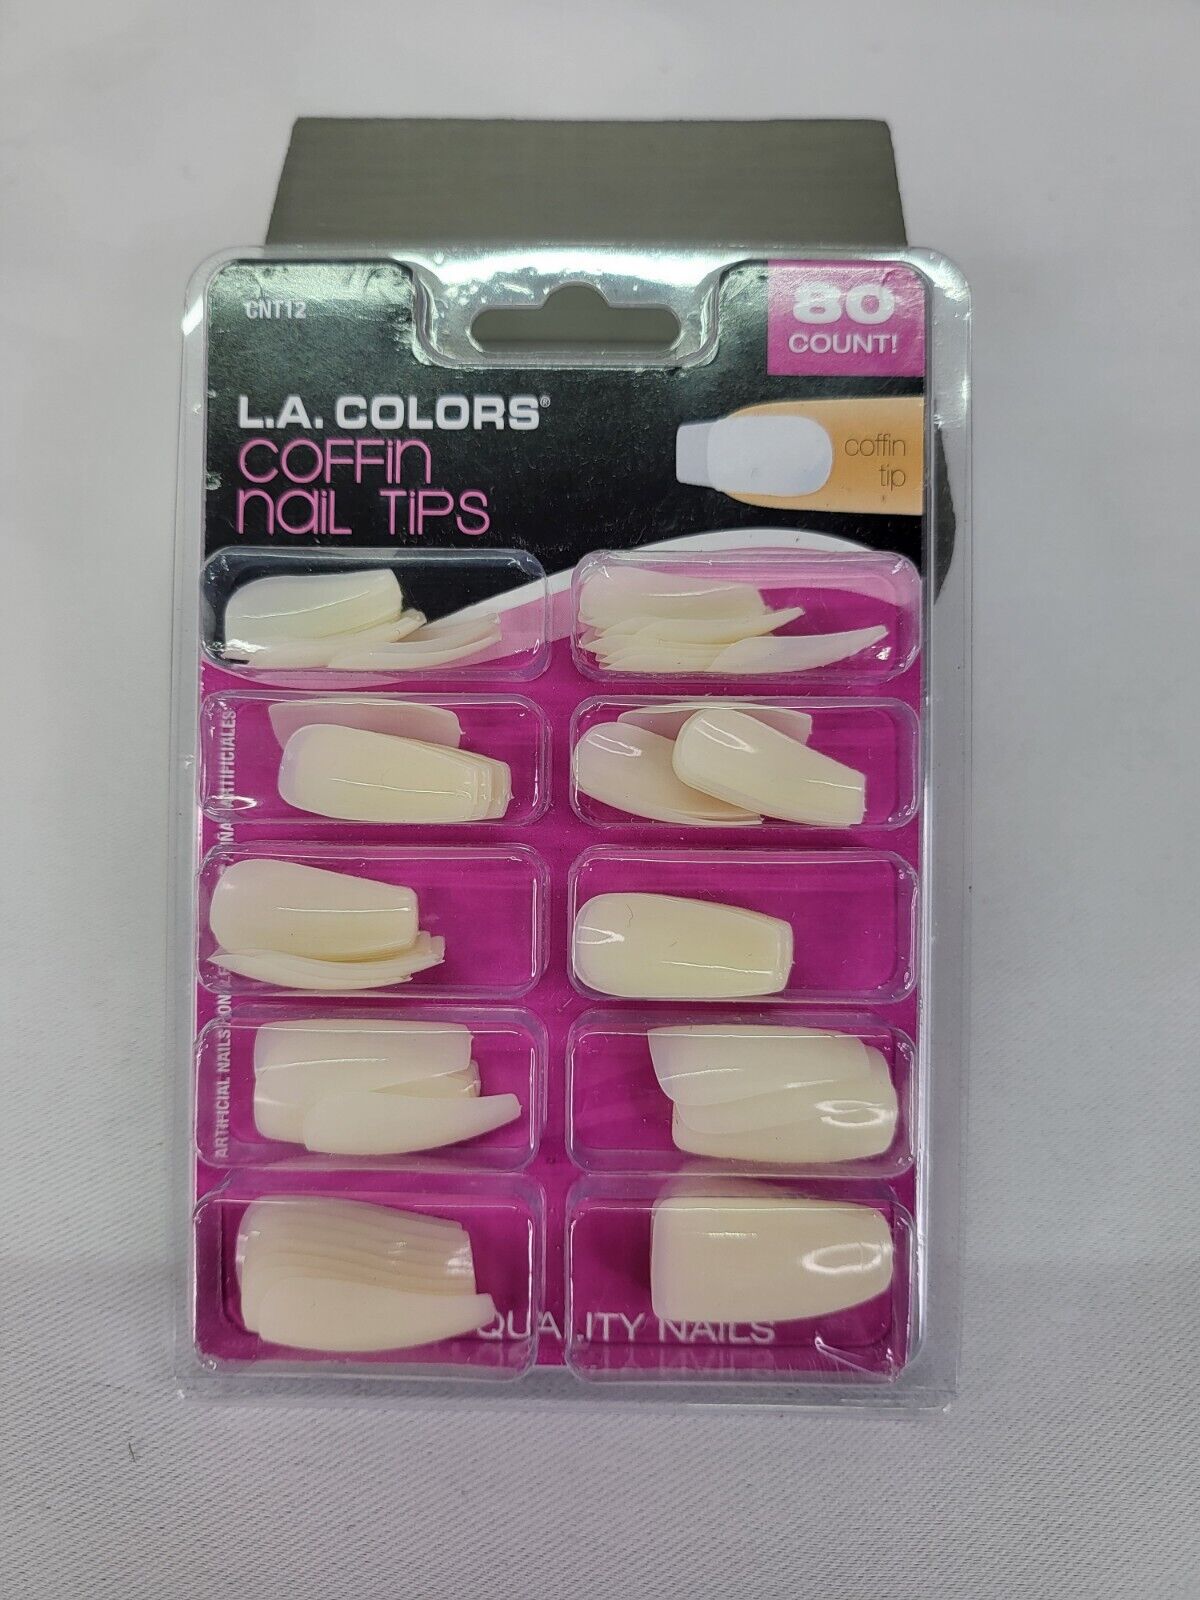 L.A. Colors Coffin Nail Tips 80 Count CNT 12 | eBay